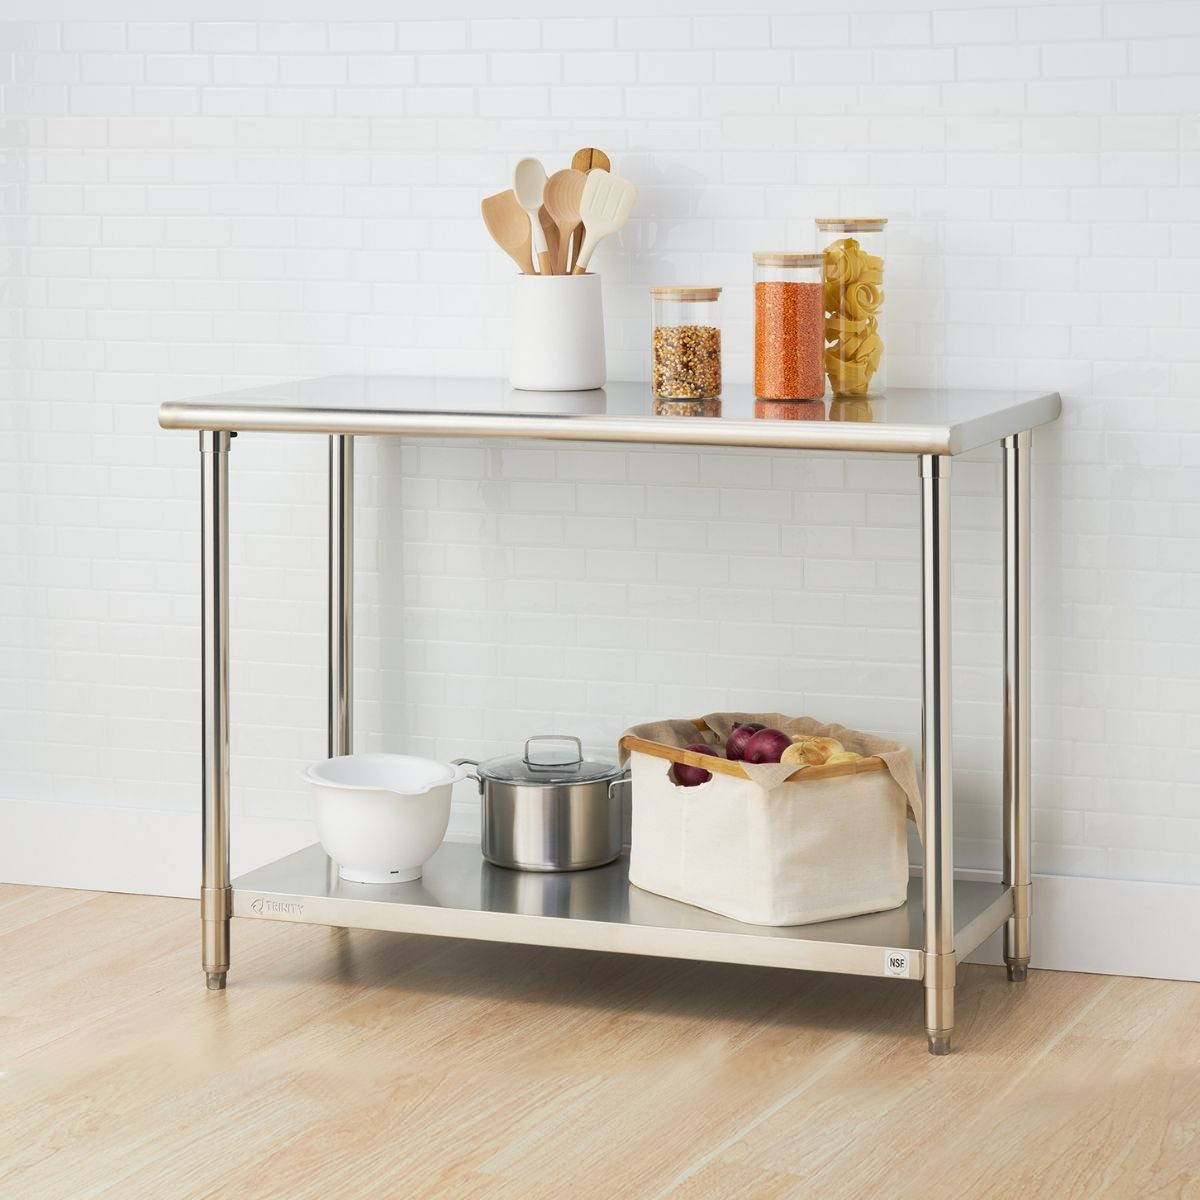 stainless steel table for kitchen use